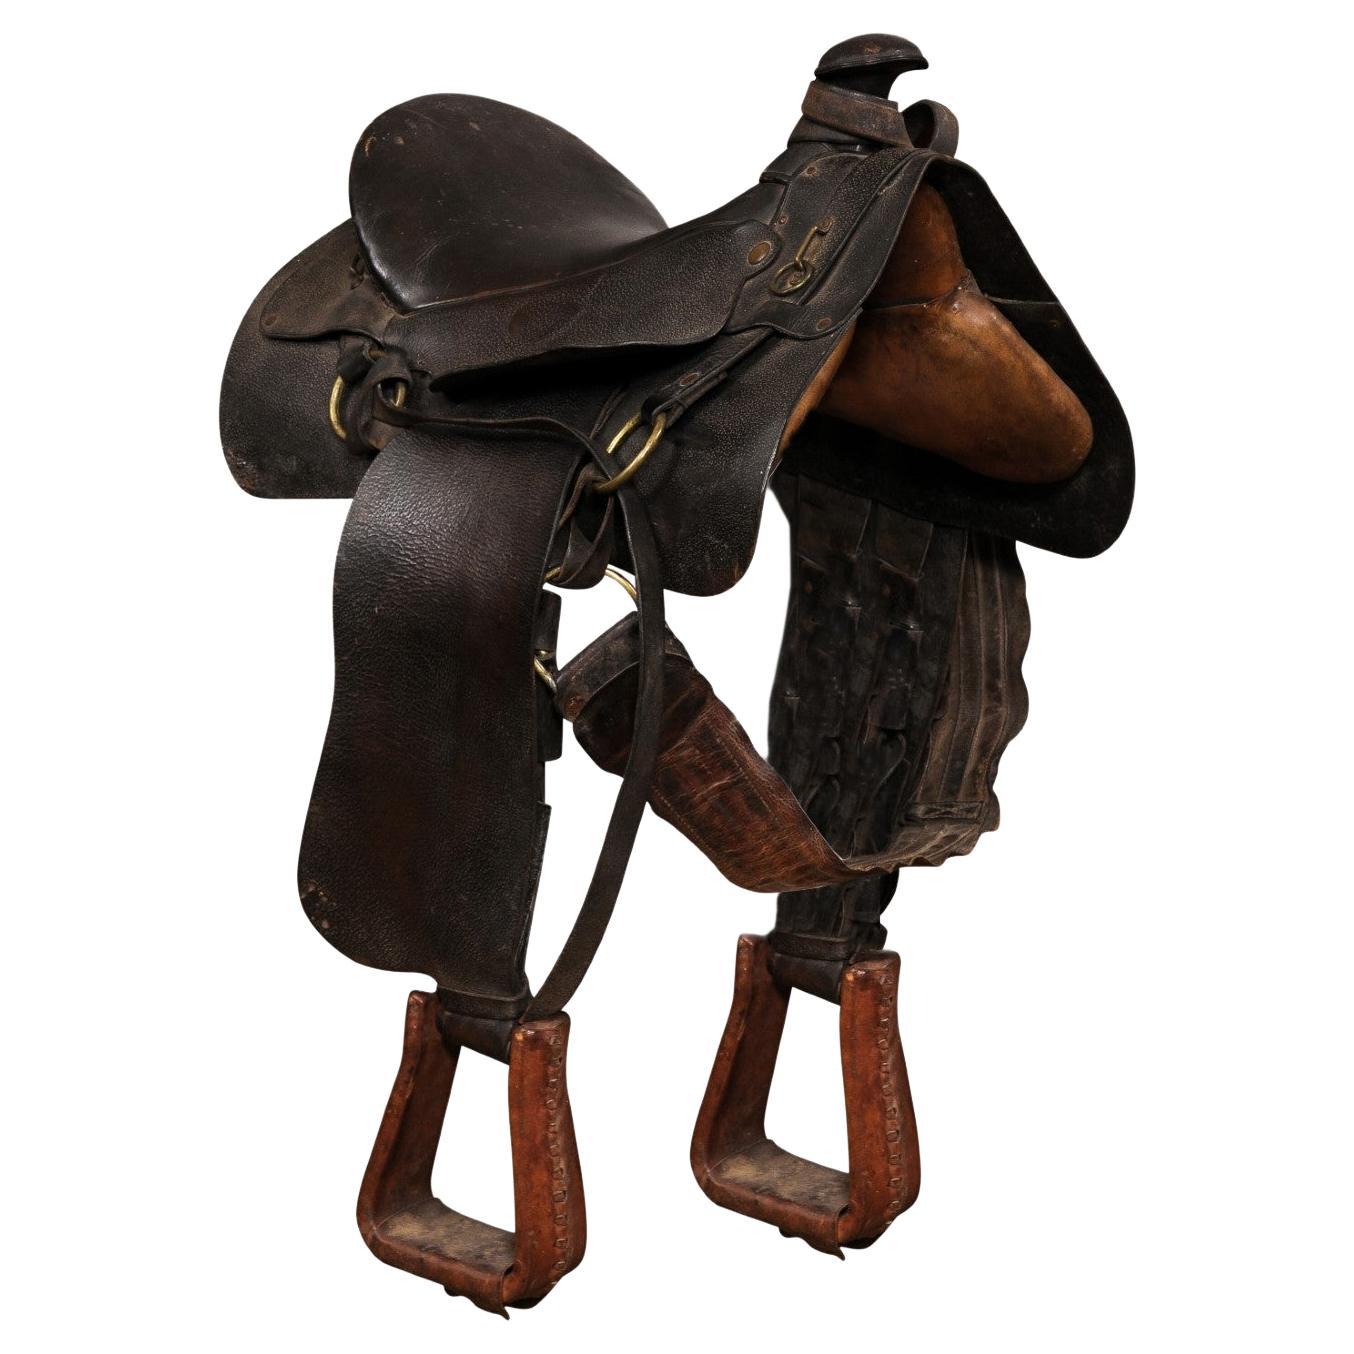 Vintage American Western Style Leather Saddle with Weathered Patina For Sale